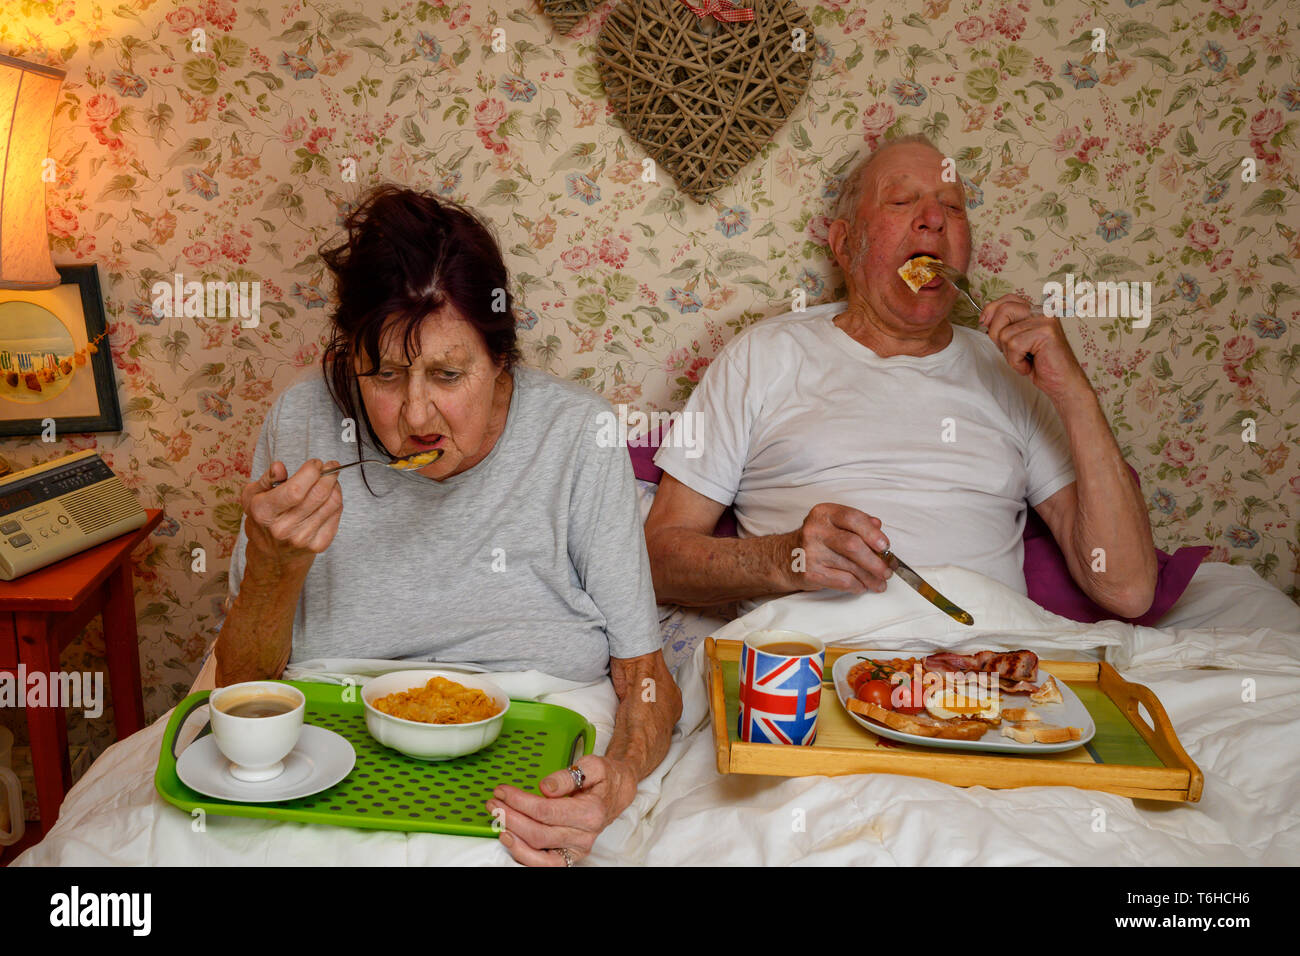 Vieux couple eating breakfast in bed Banque D'Images